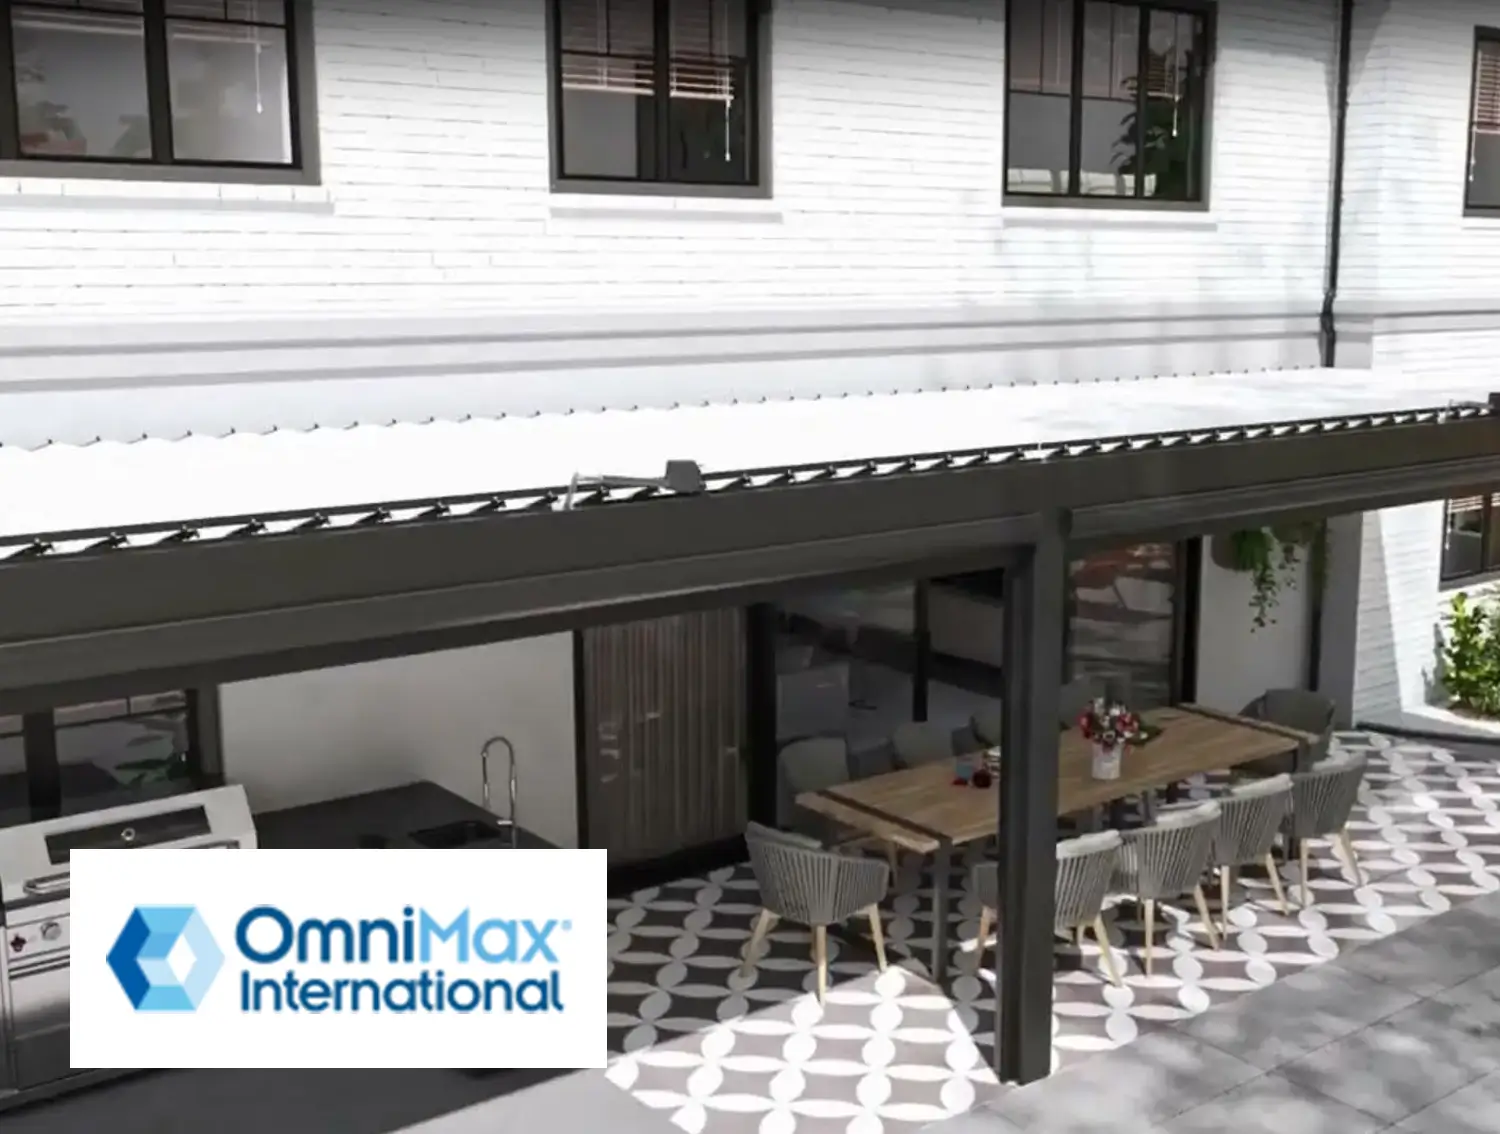 Omnimax International – Boosting Customer Experience and ROI Through 3D Visualization